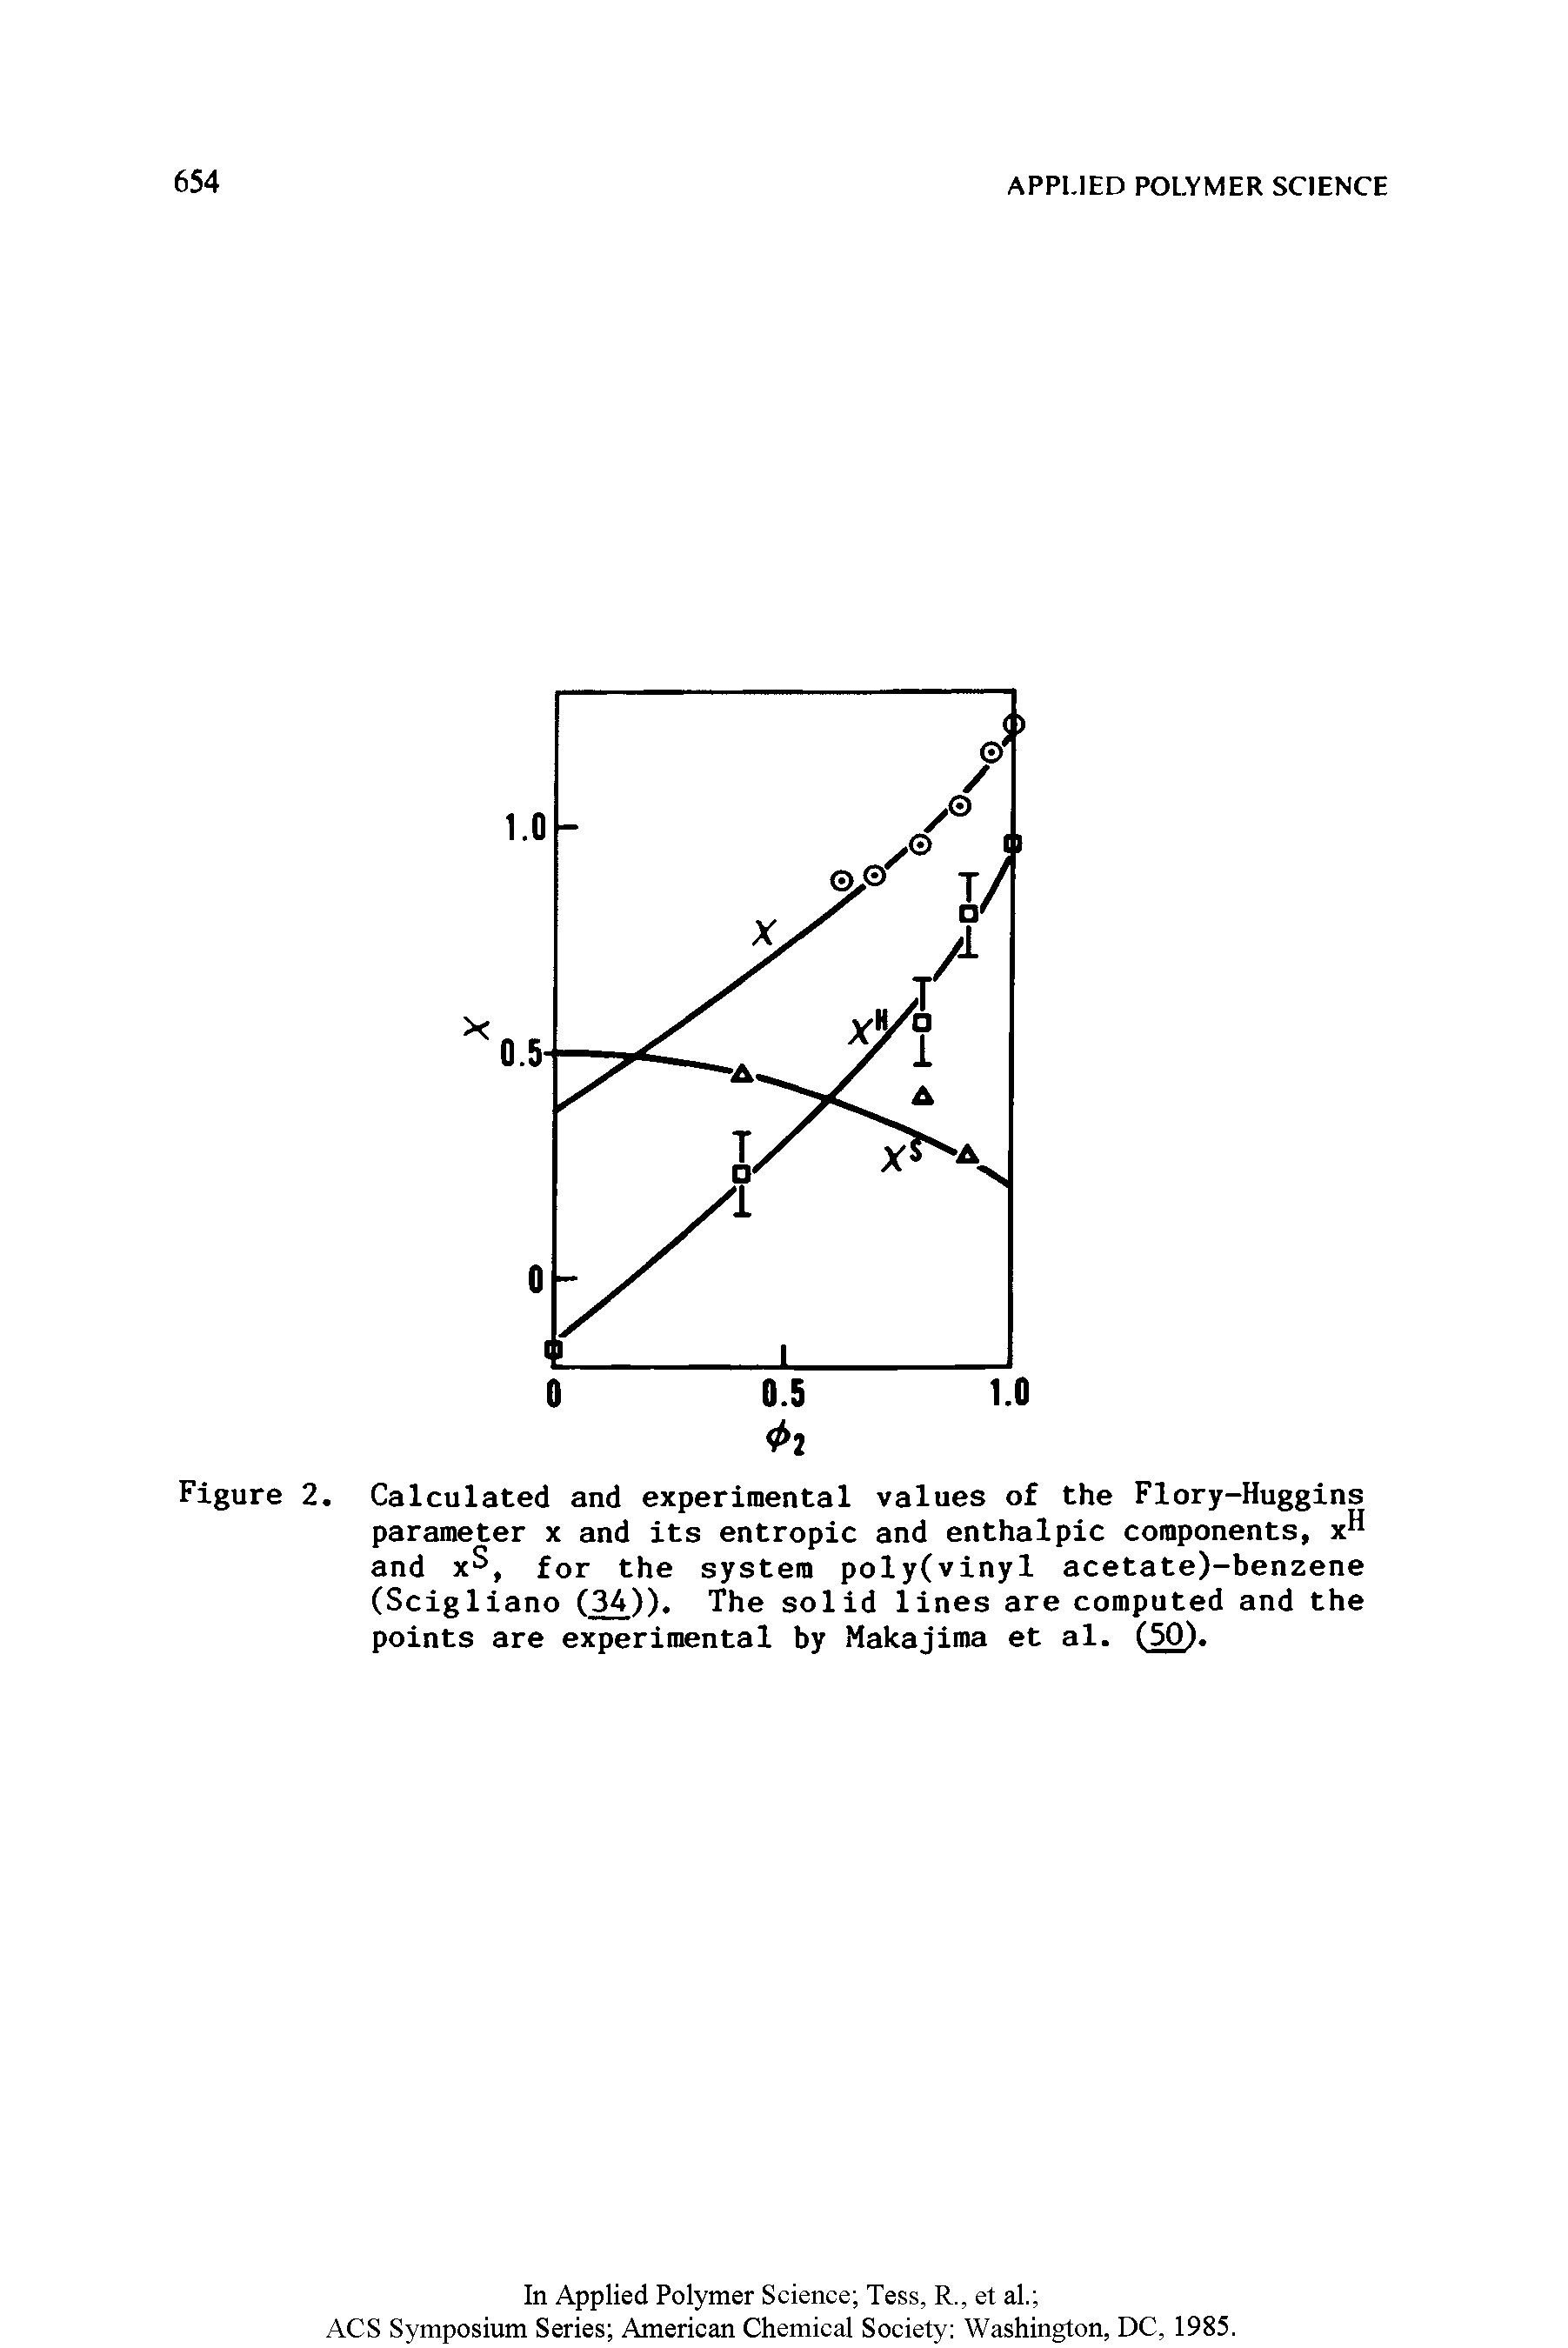 Figure 2. Calculated and experimental values of the Flory-Huggins parameter x and its entropic and enthalpic components, x and x, for the system poly(vinyl acetate)-benzene (Scigliano (34)). The solid lines are computed and the points are experimental by Makajima et al. (50).